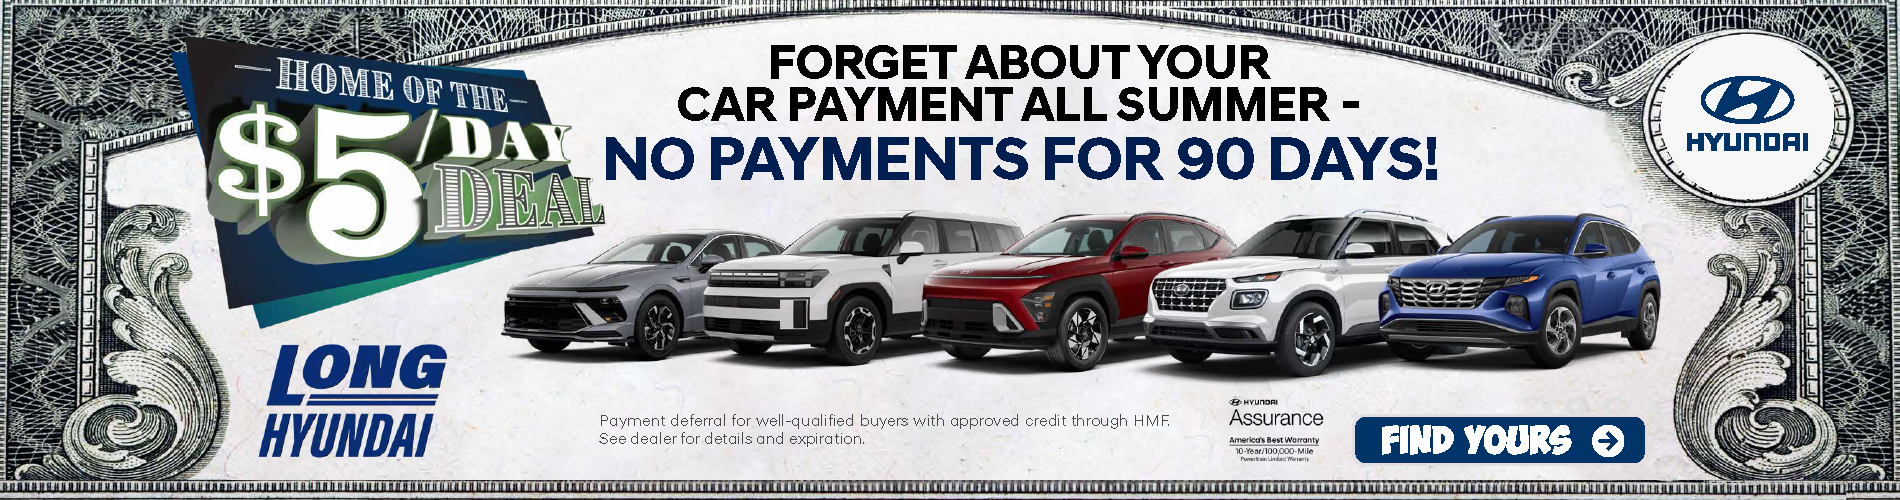 Forget about your car payment all summer